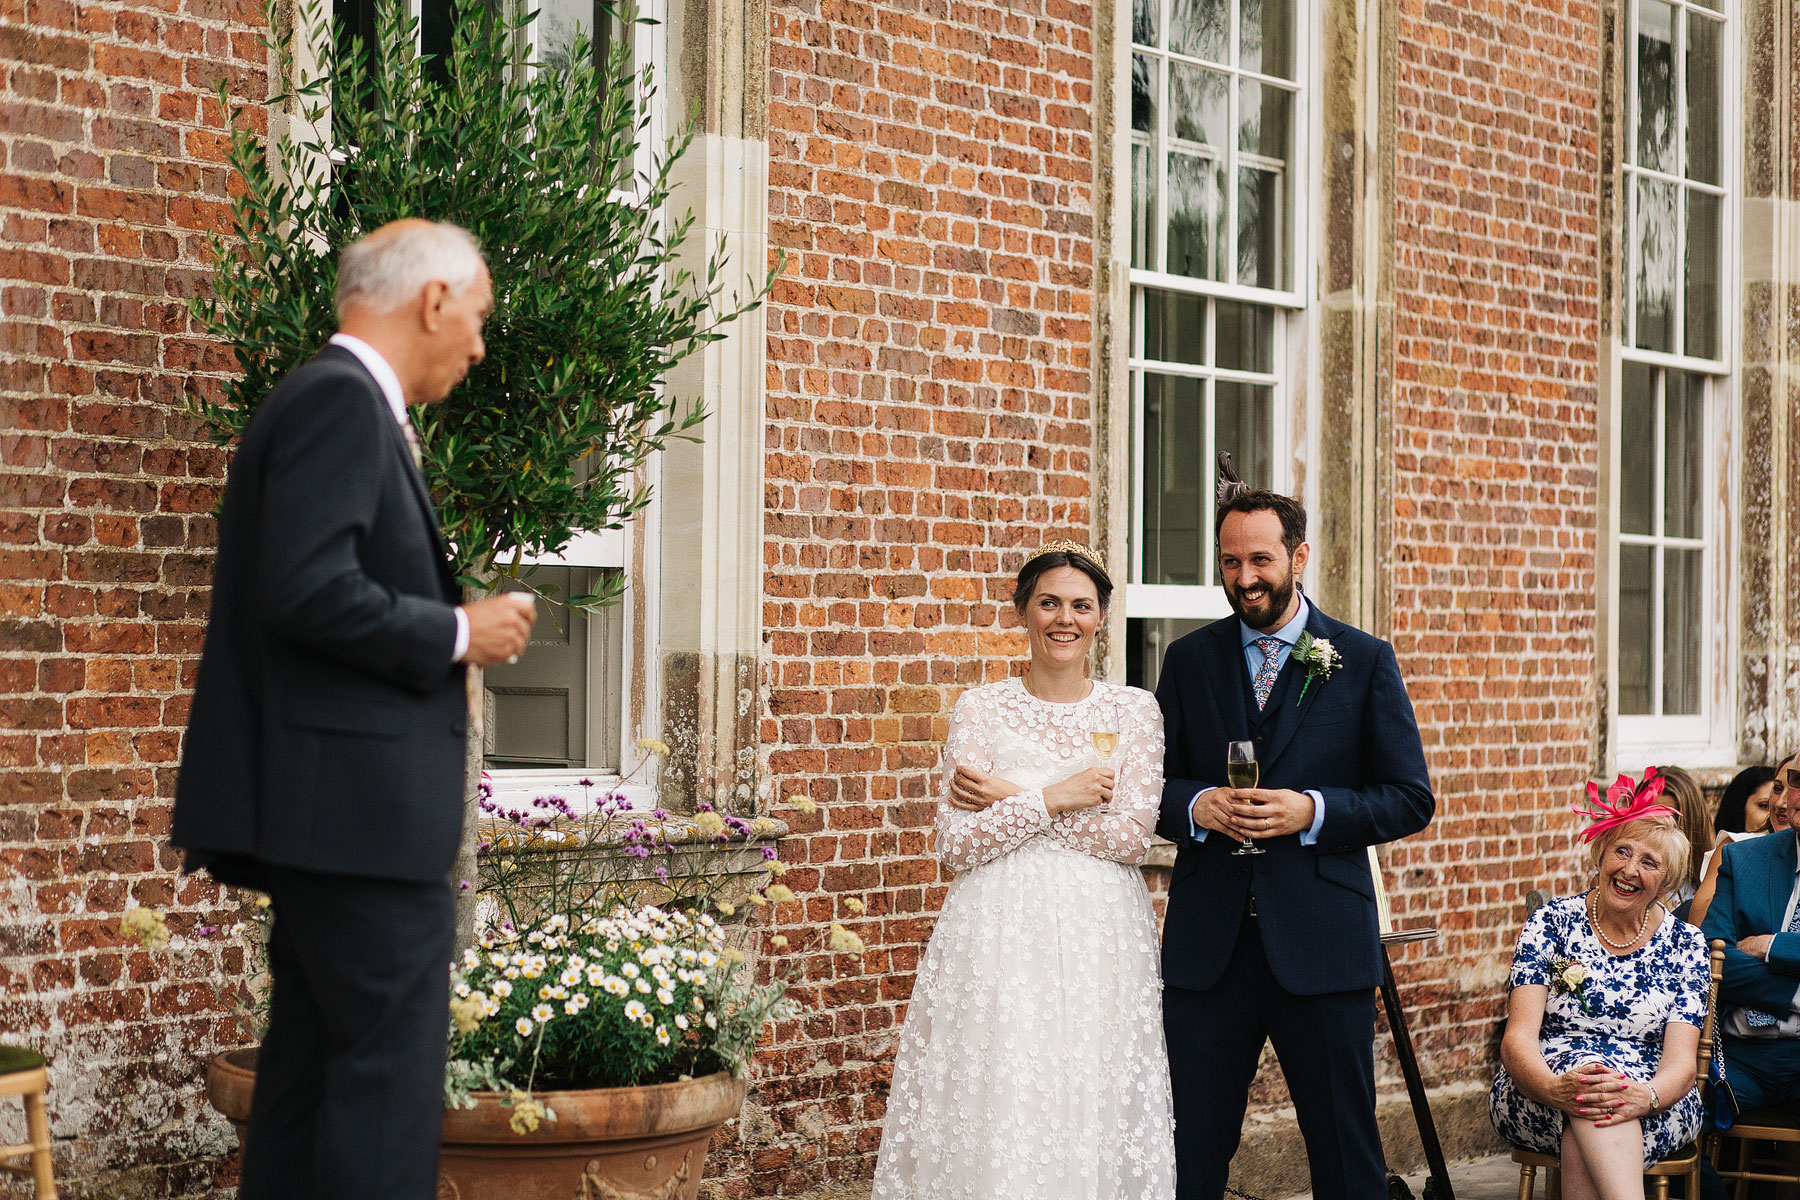 outdoor wedding speeches at a country house in dorset